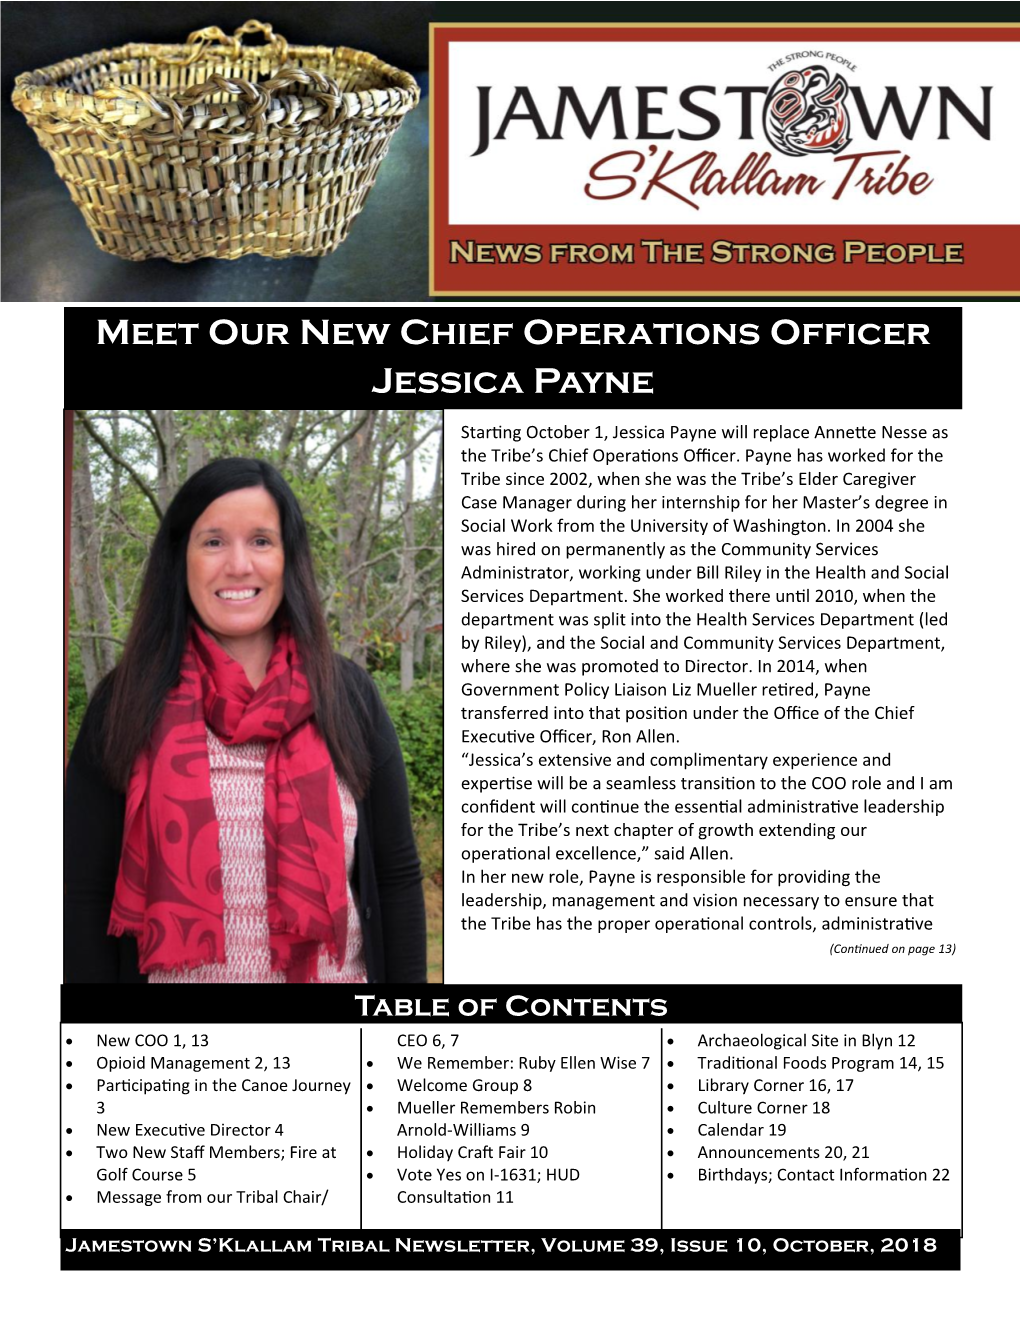 Meet Our New Chief Operations Officer Jessica Payne